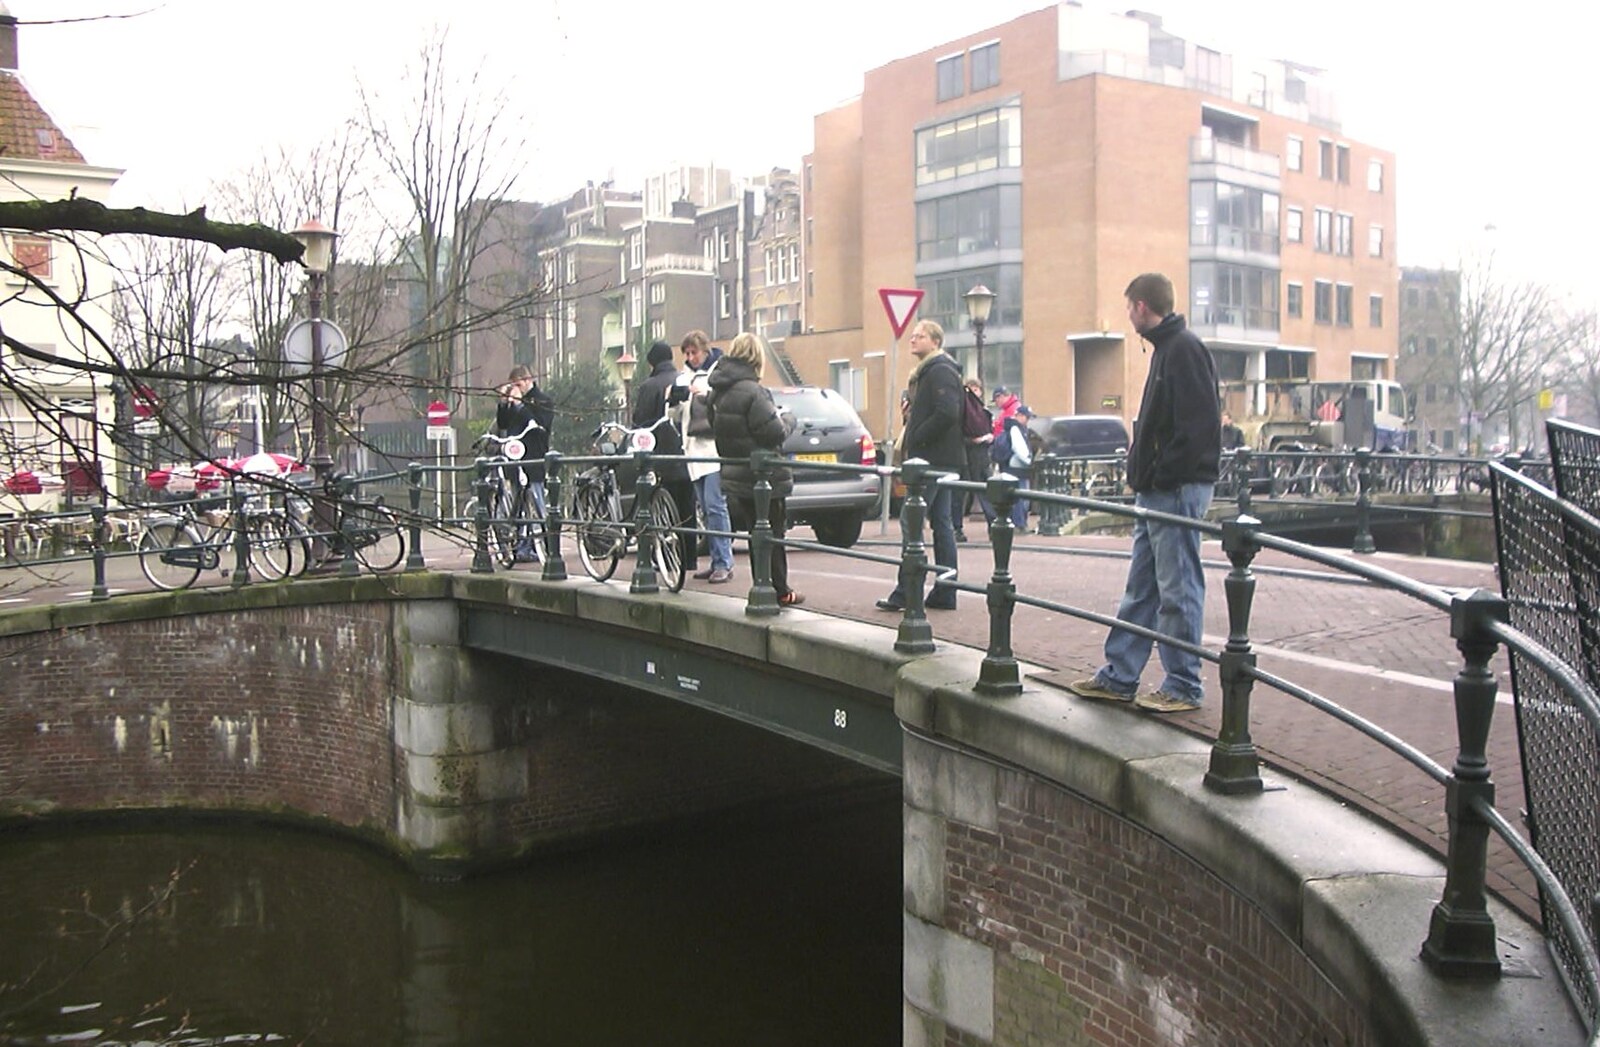 On a bridge somewhere from Anne Frank, Markets and Mikey-P's Stag Do, Amsterdam, Netherlands - 6th March 2004